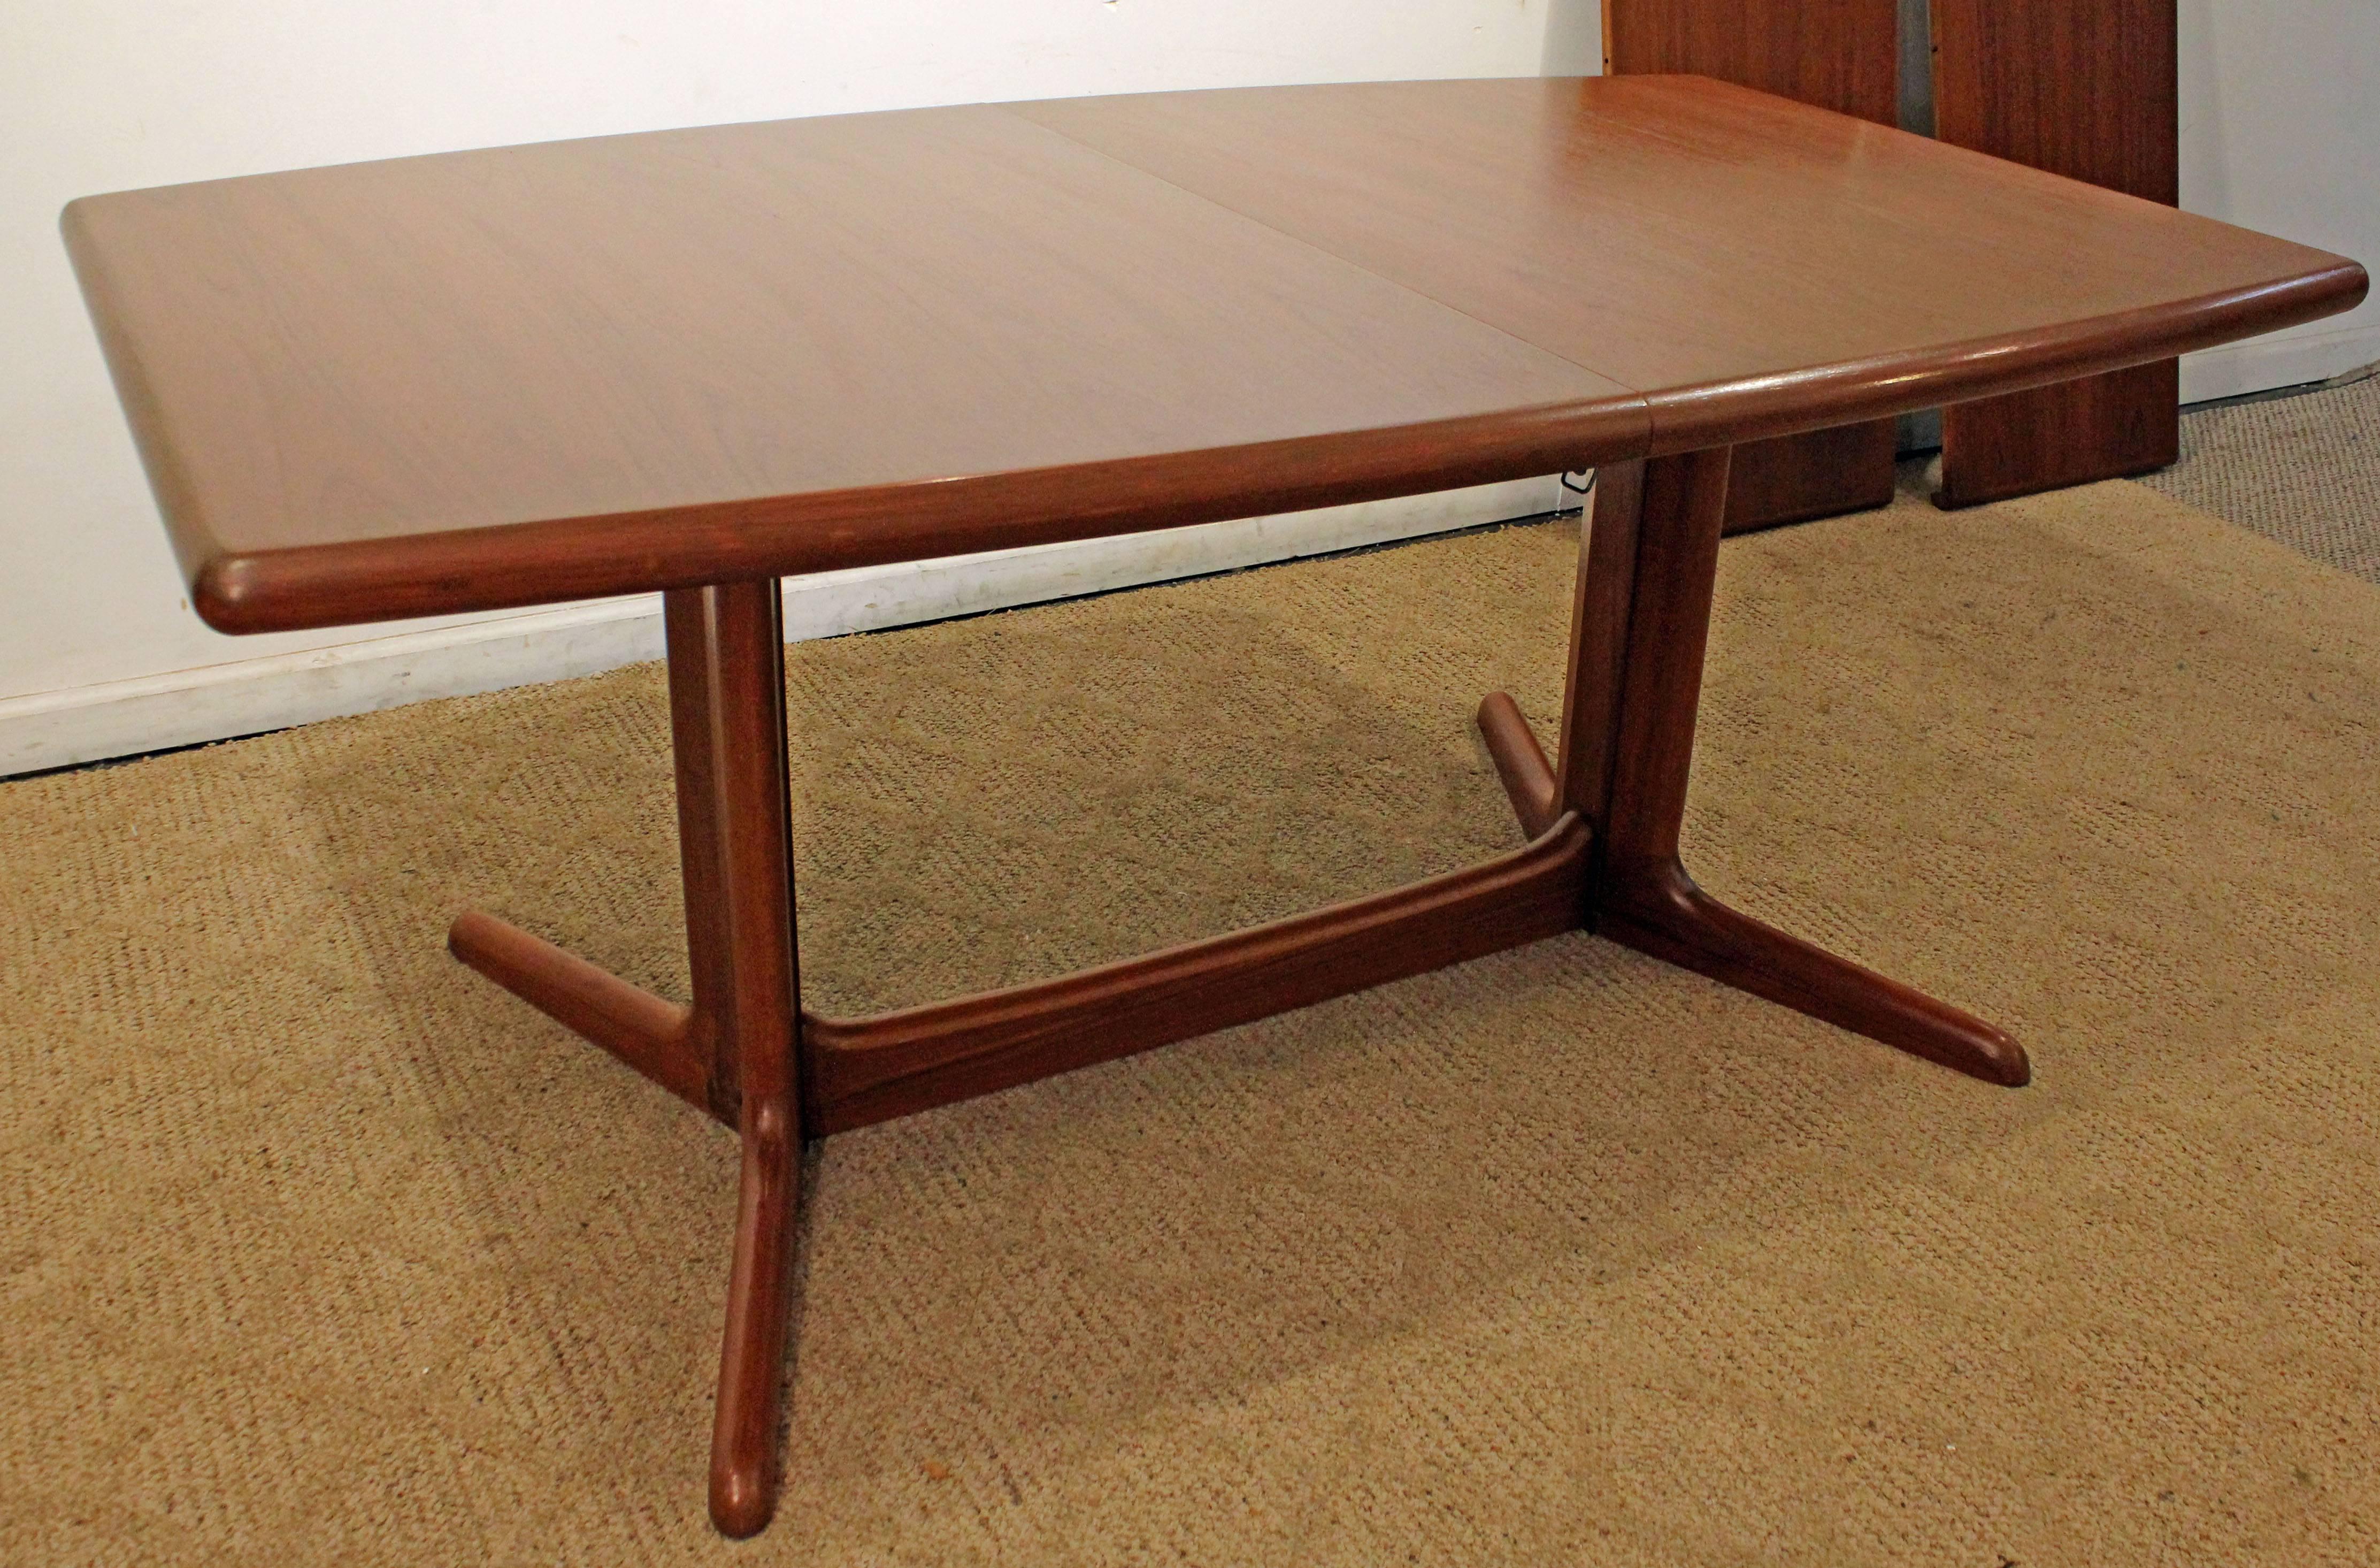 Offered is a Mid-Century Modern teak dining table. Features a 